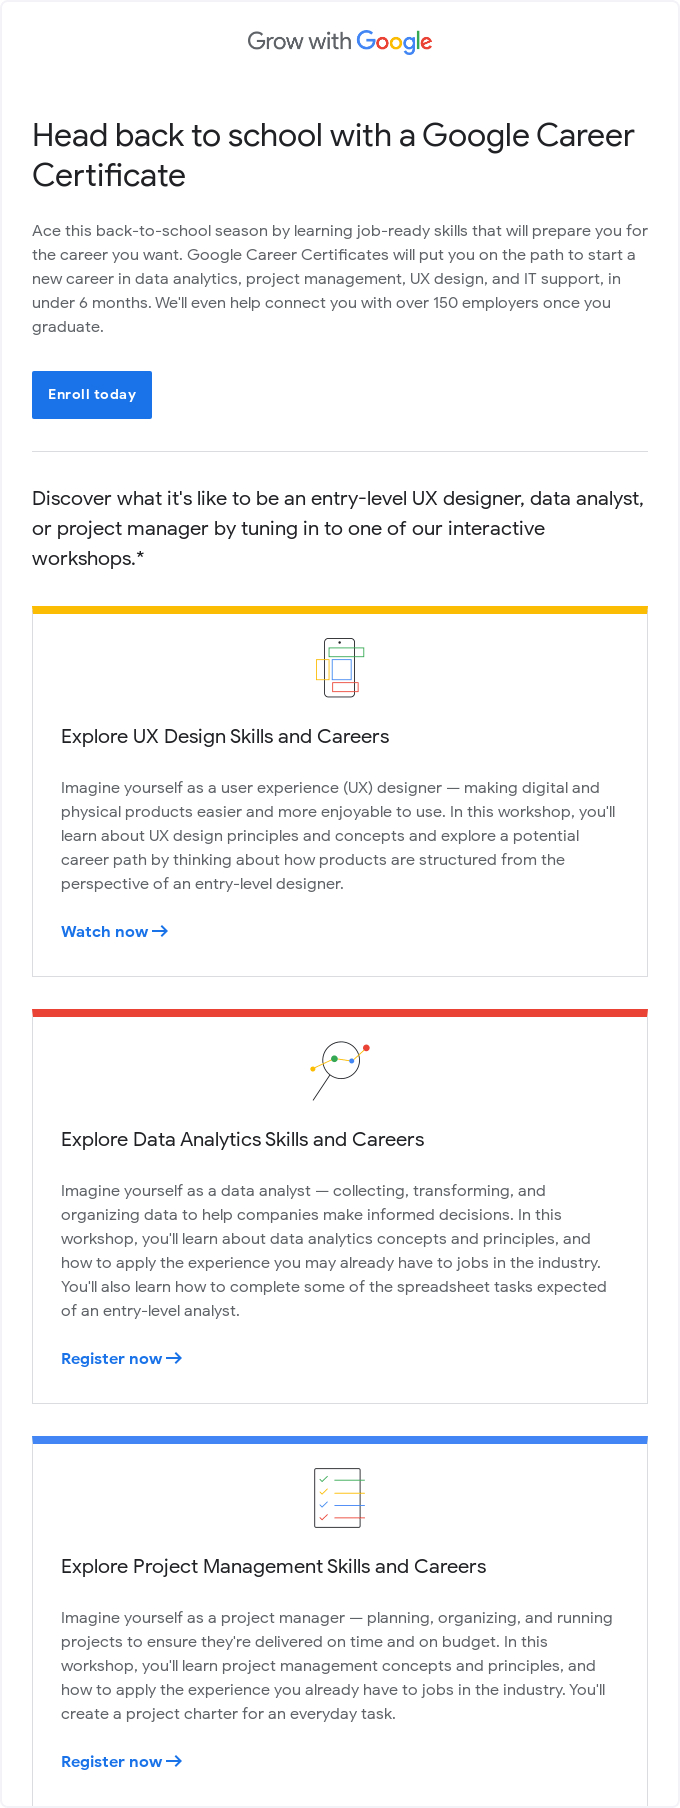 Back-to-school email newsletter theme by Google